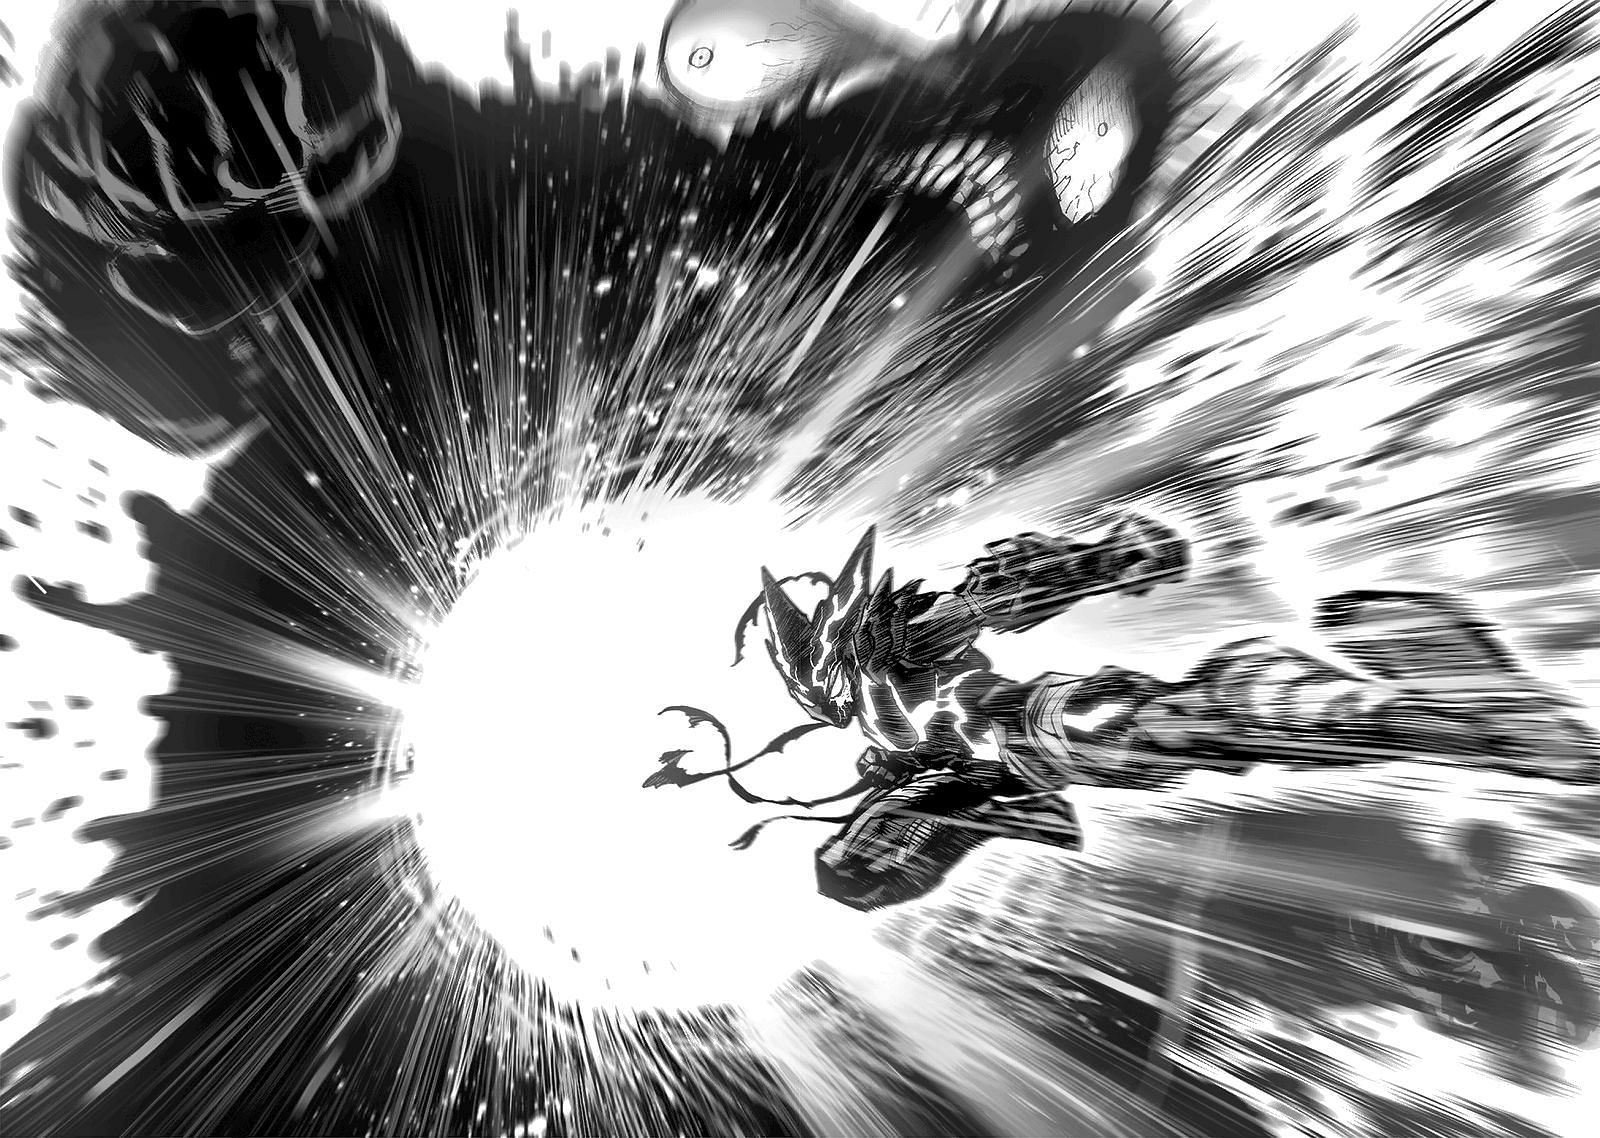 Garou attacks Fuhrer Ugly as seen in One Punch Man Chapter 154 (Image via onepiecechapters.com)